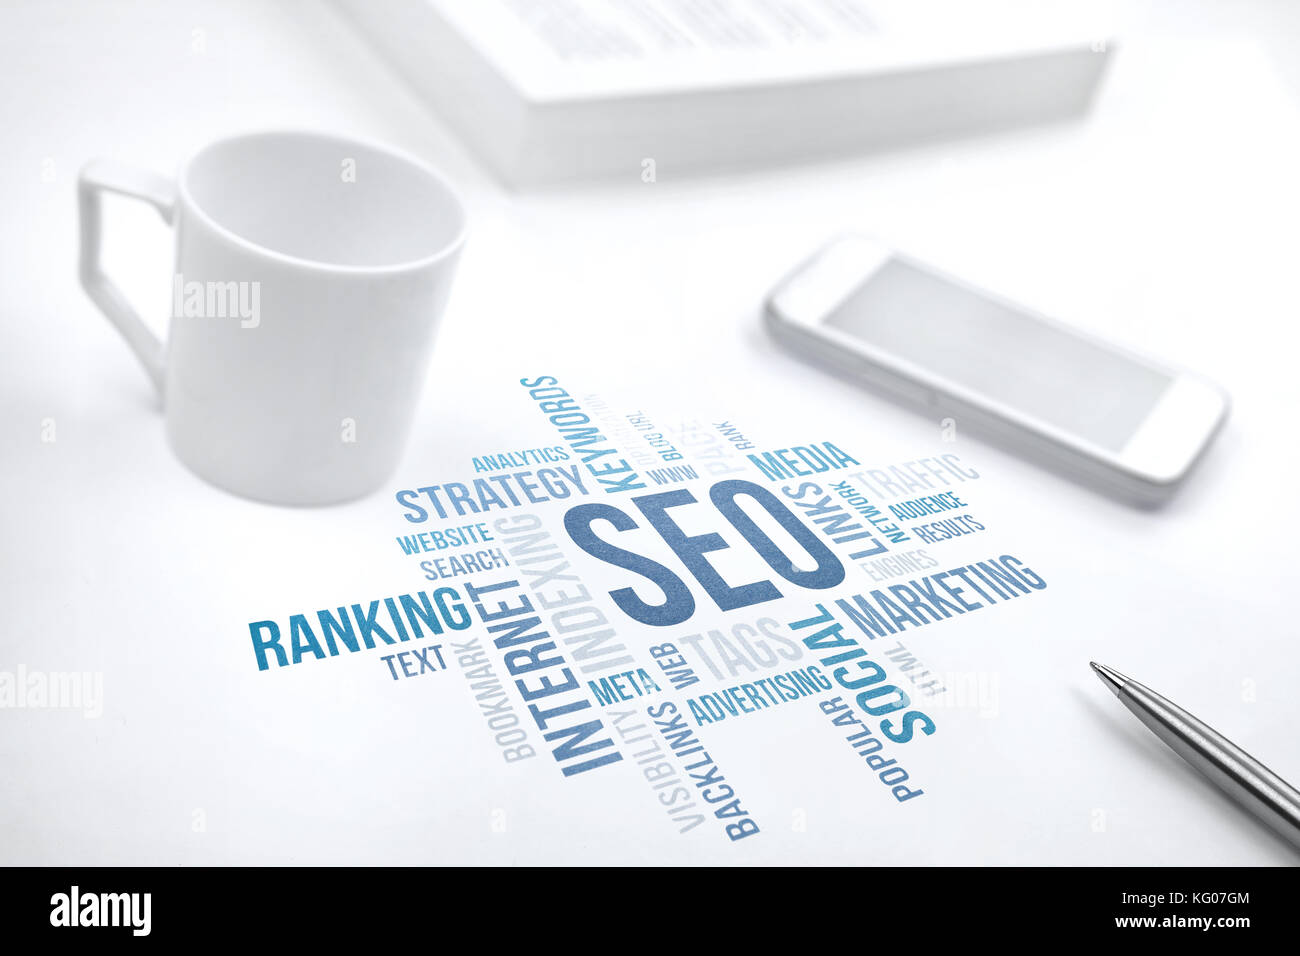 Seo, search engine optimization, business concept word cloud. Print document, smartphone, book, pen and coffee cup. Blue toned. Stock Photo